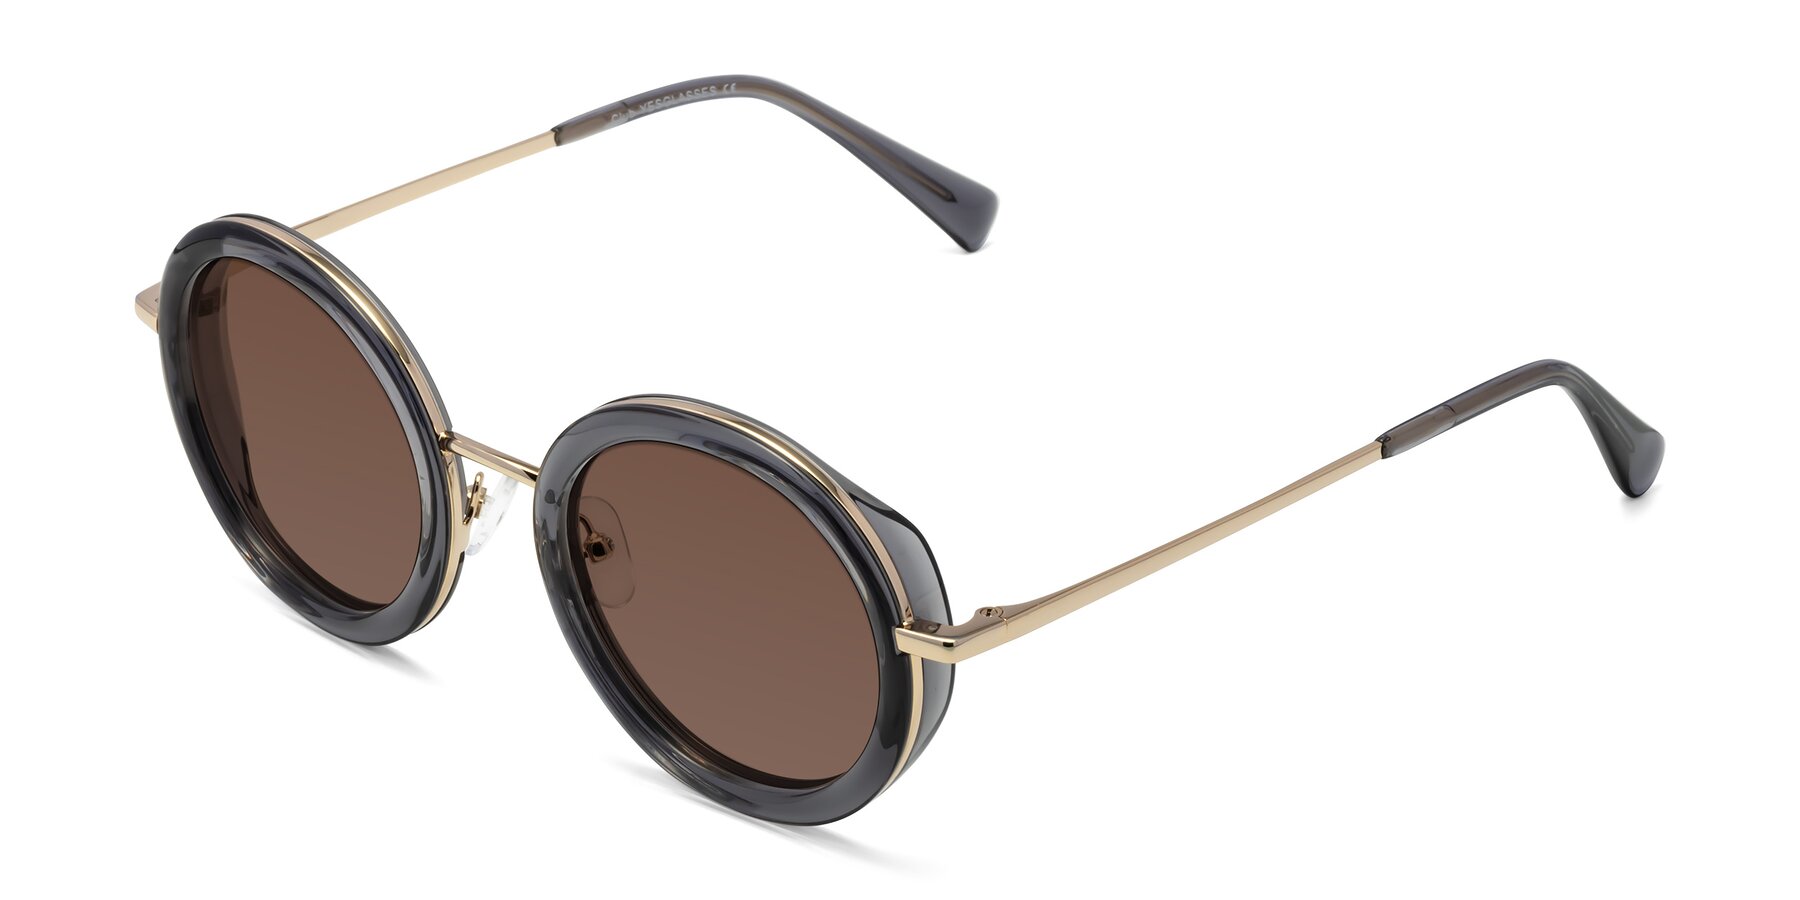 Angle of Club in Gray-Gold with Brown Tinted Lenses